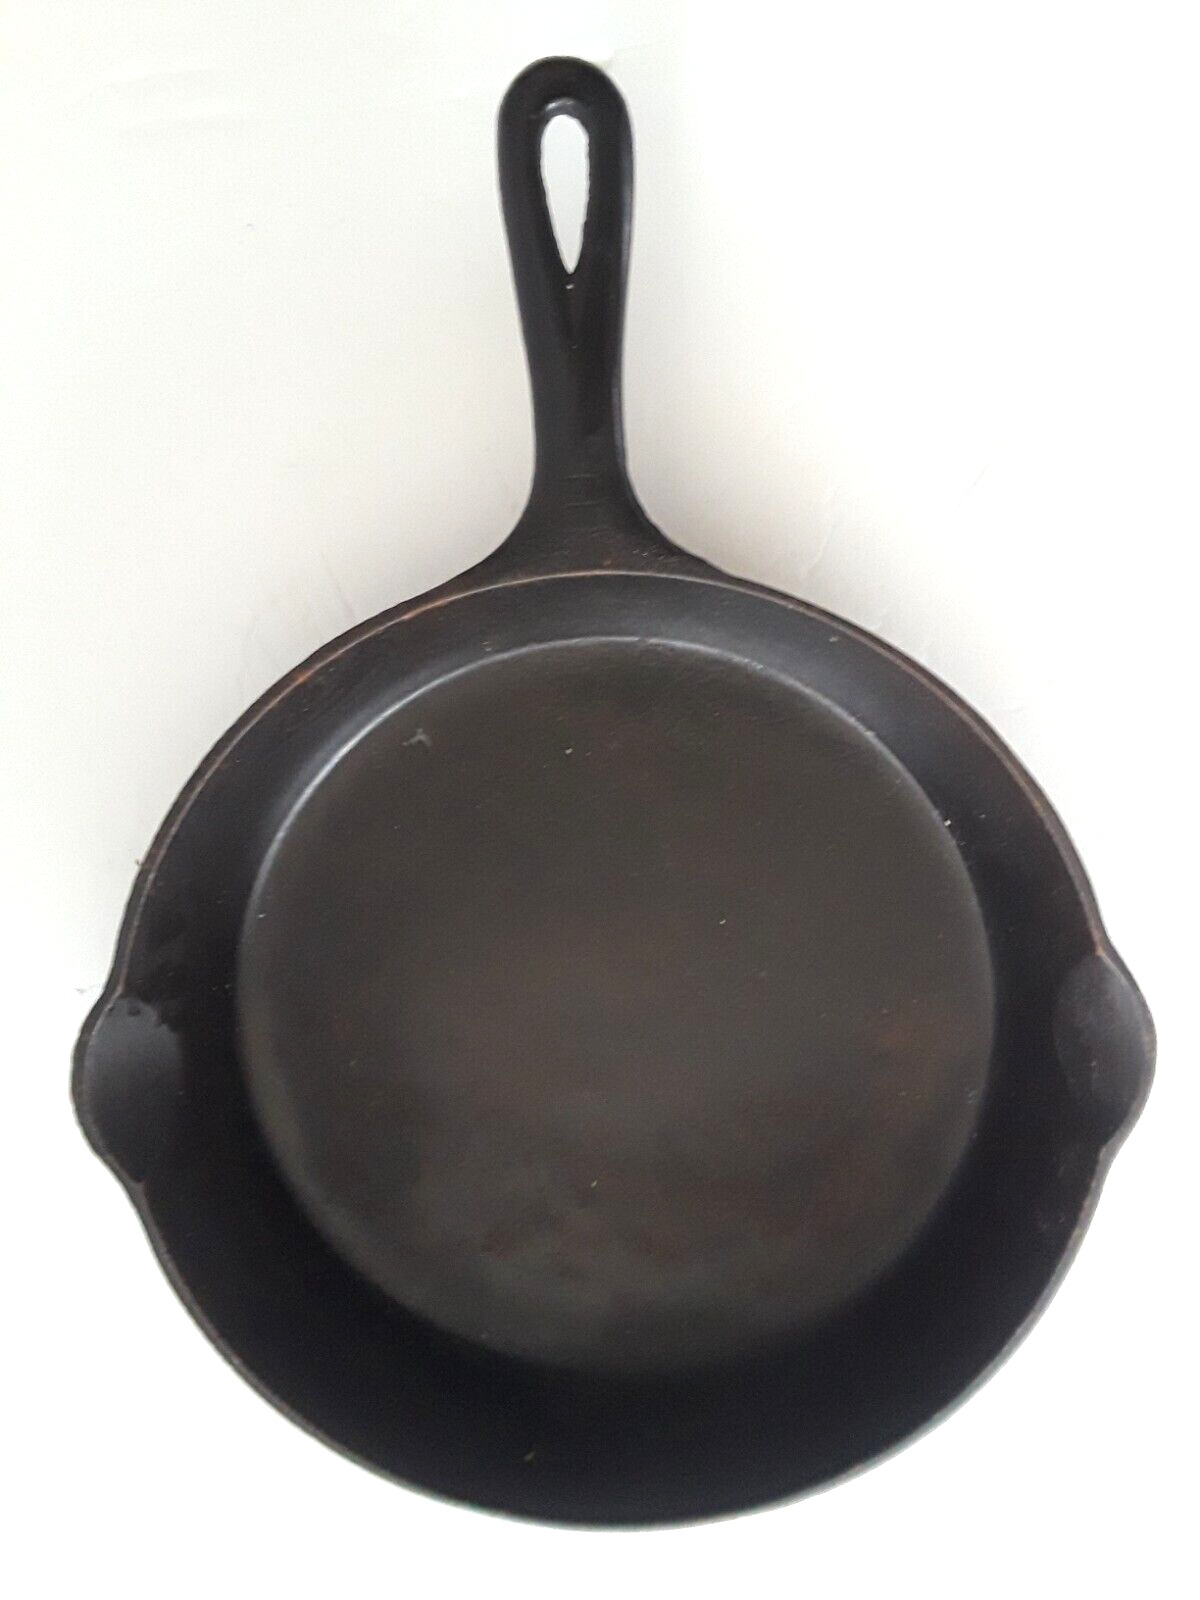 Griswold 8 Cast Iron Skillet 704P Erie Pa Sits Flat